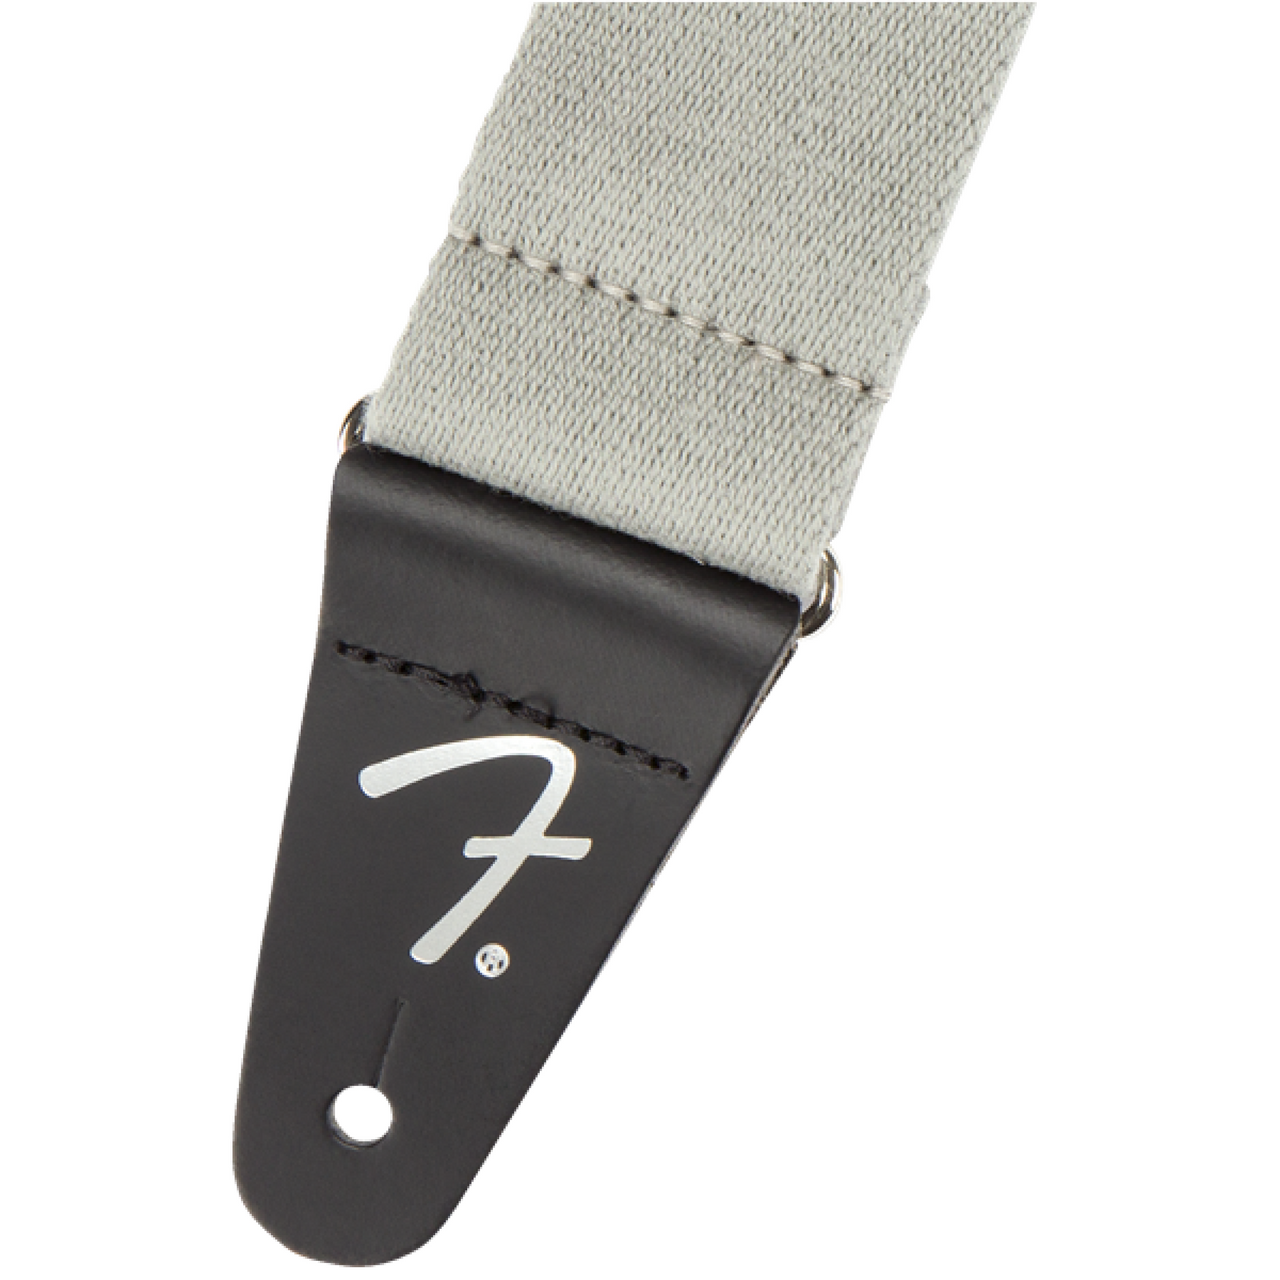 Thaly Fender Supersoft Strap Grey 2", 0990642043